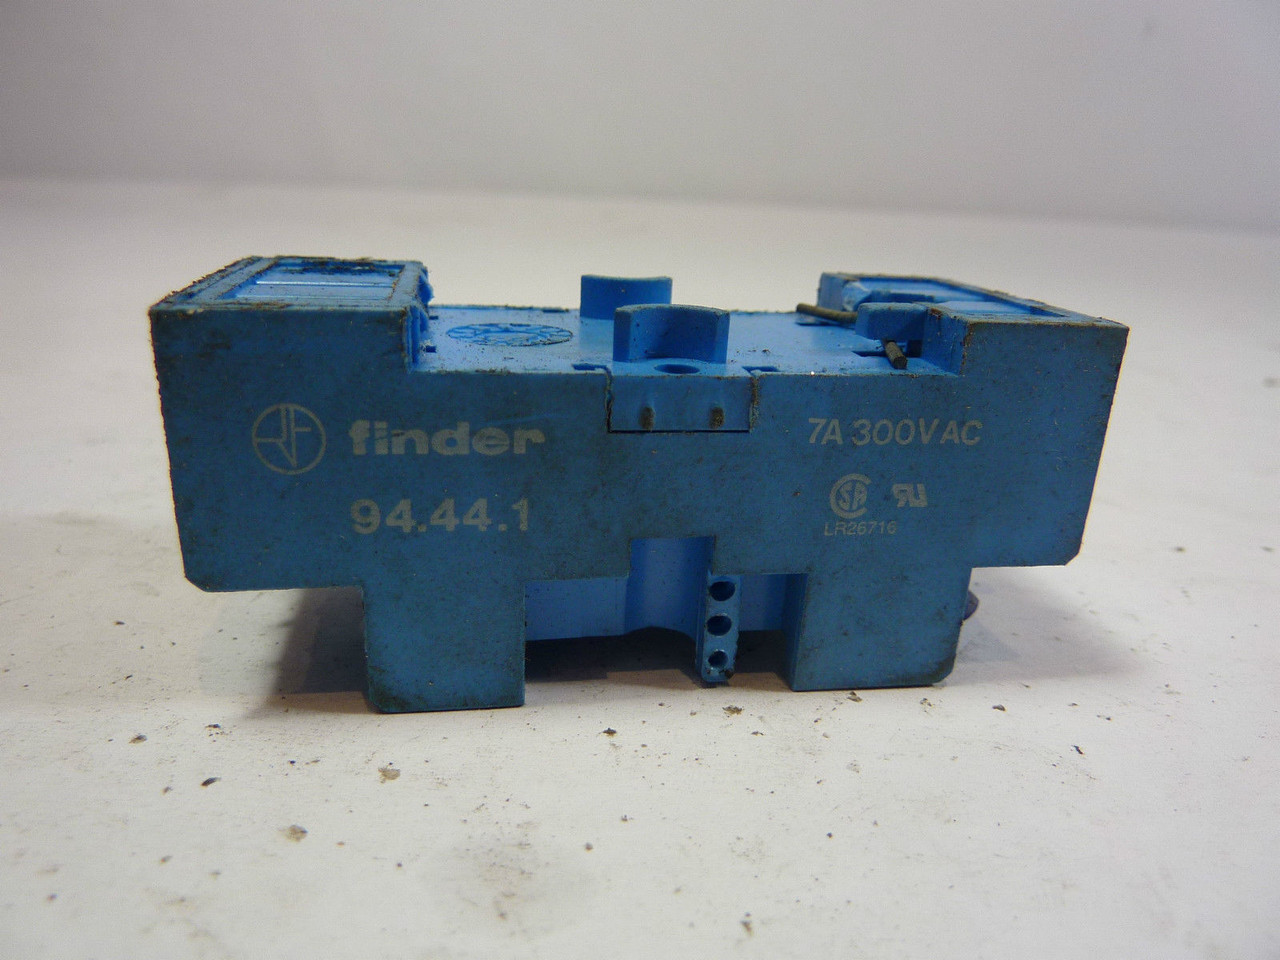 Finder 94.44.1 Relay Socket 7A 300VAC USED